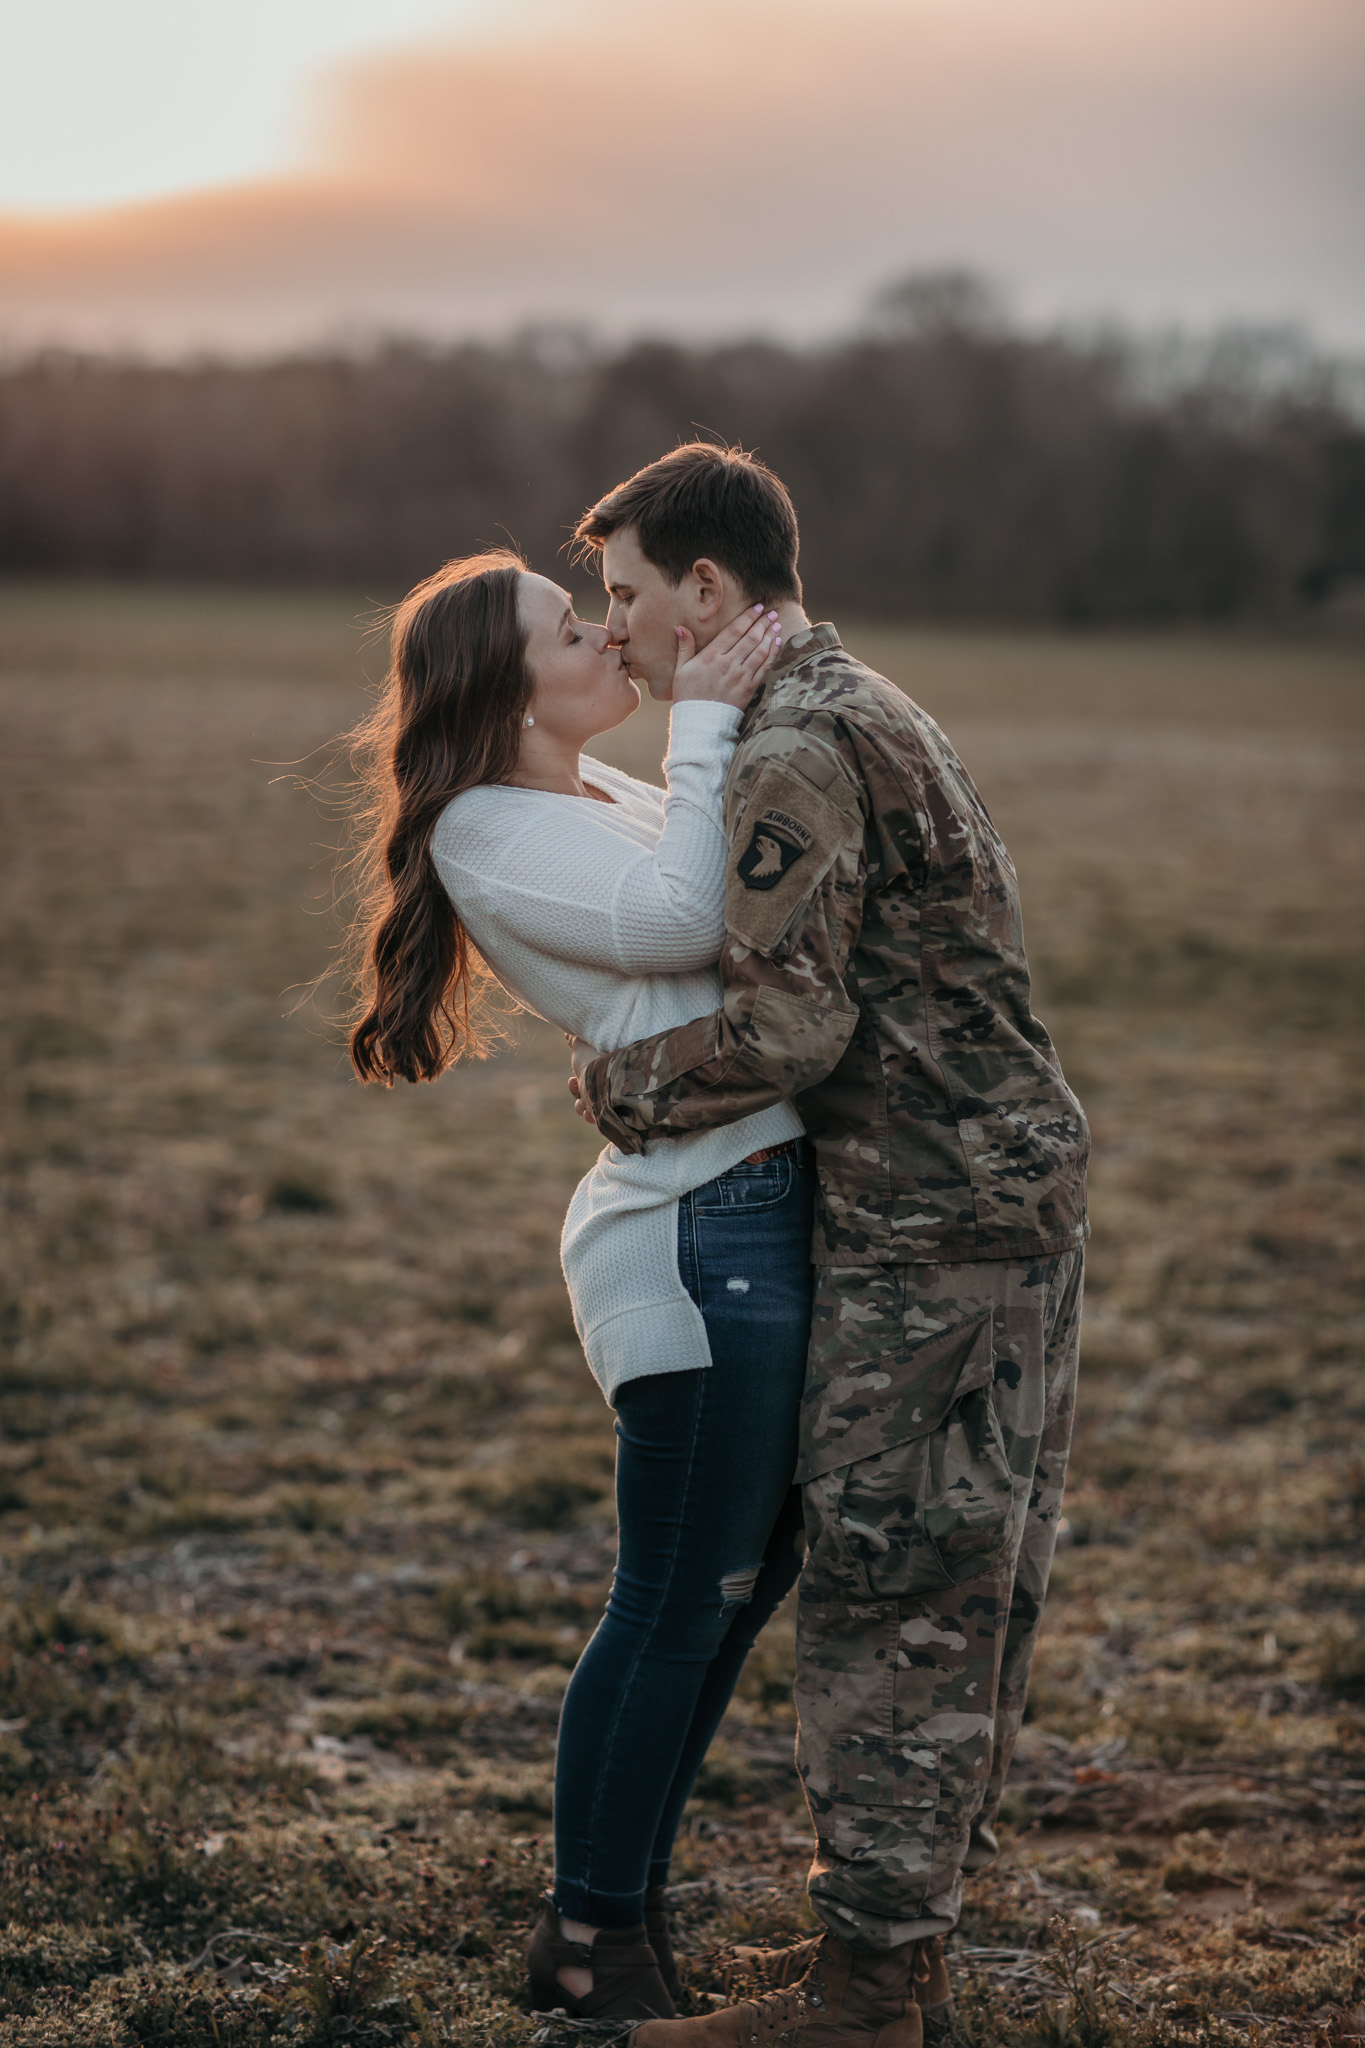  couple kissing in uniform army